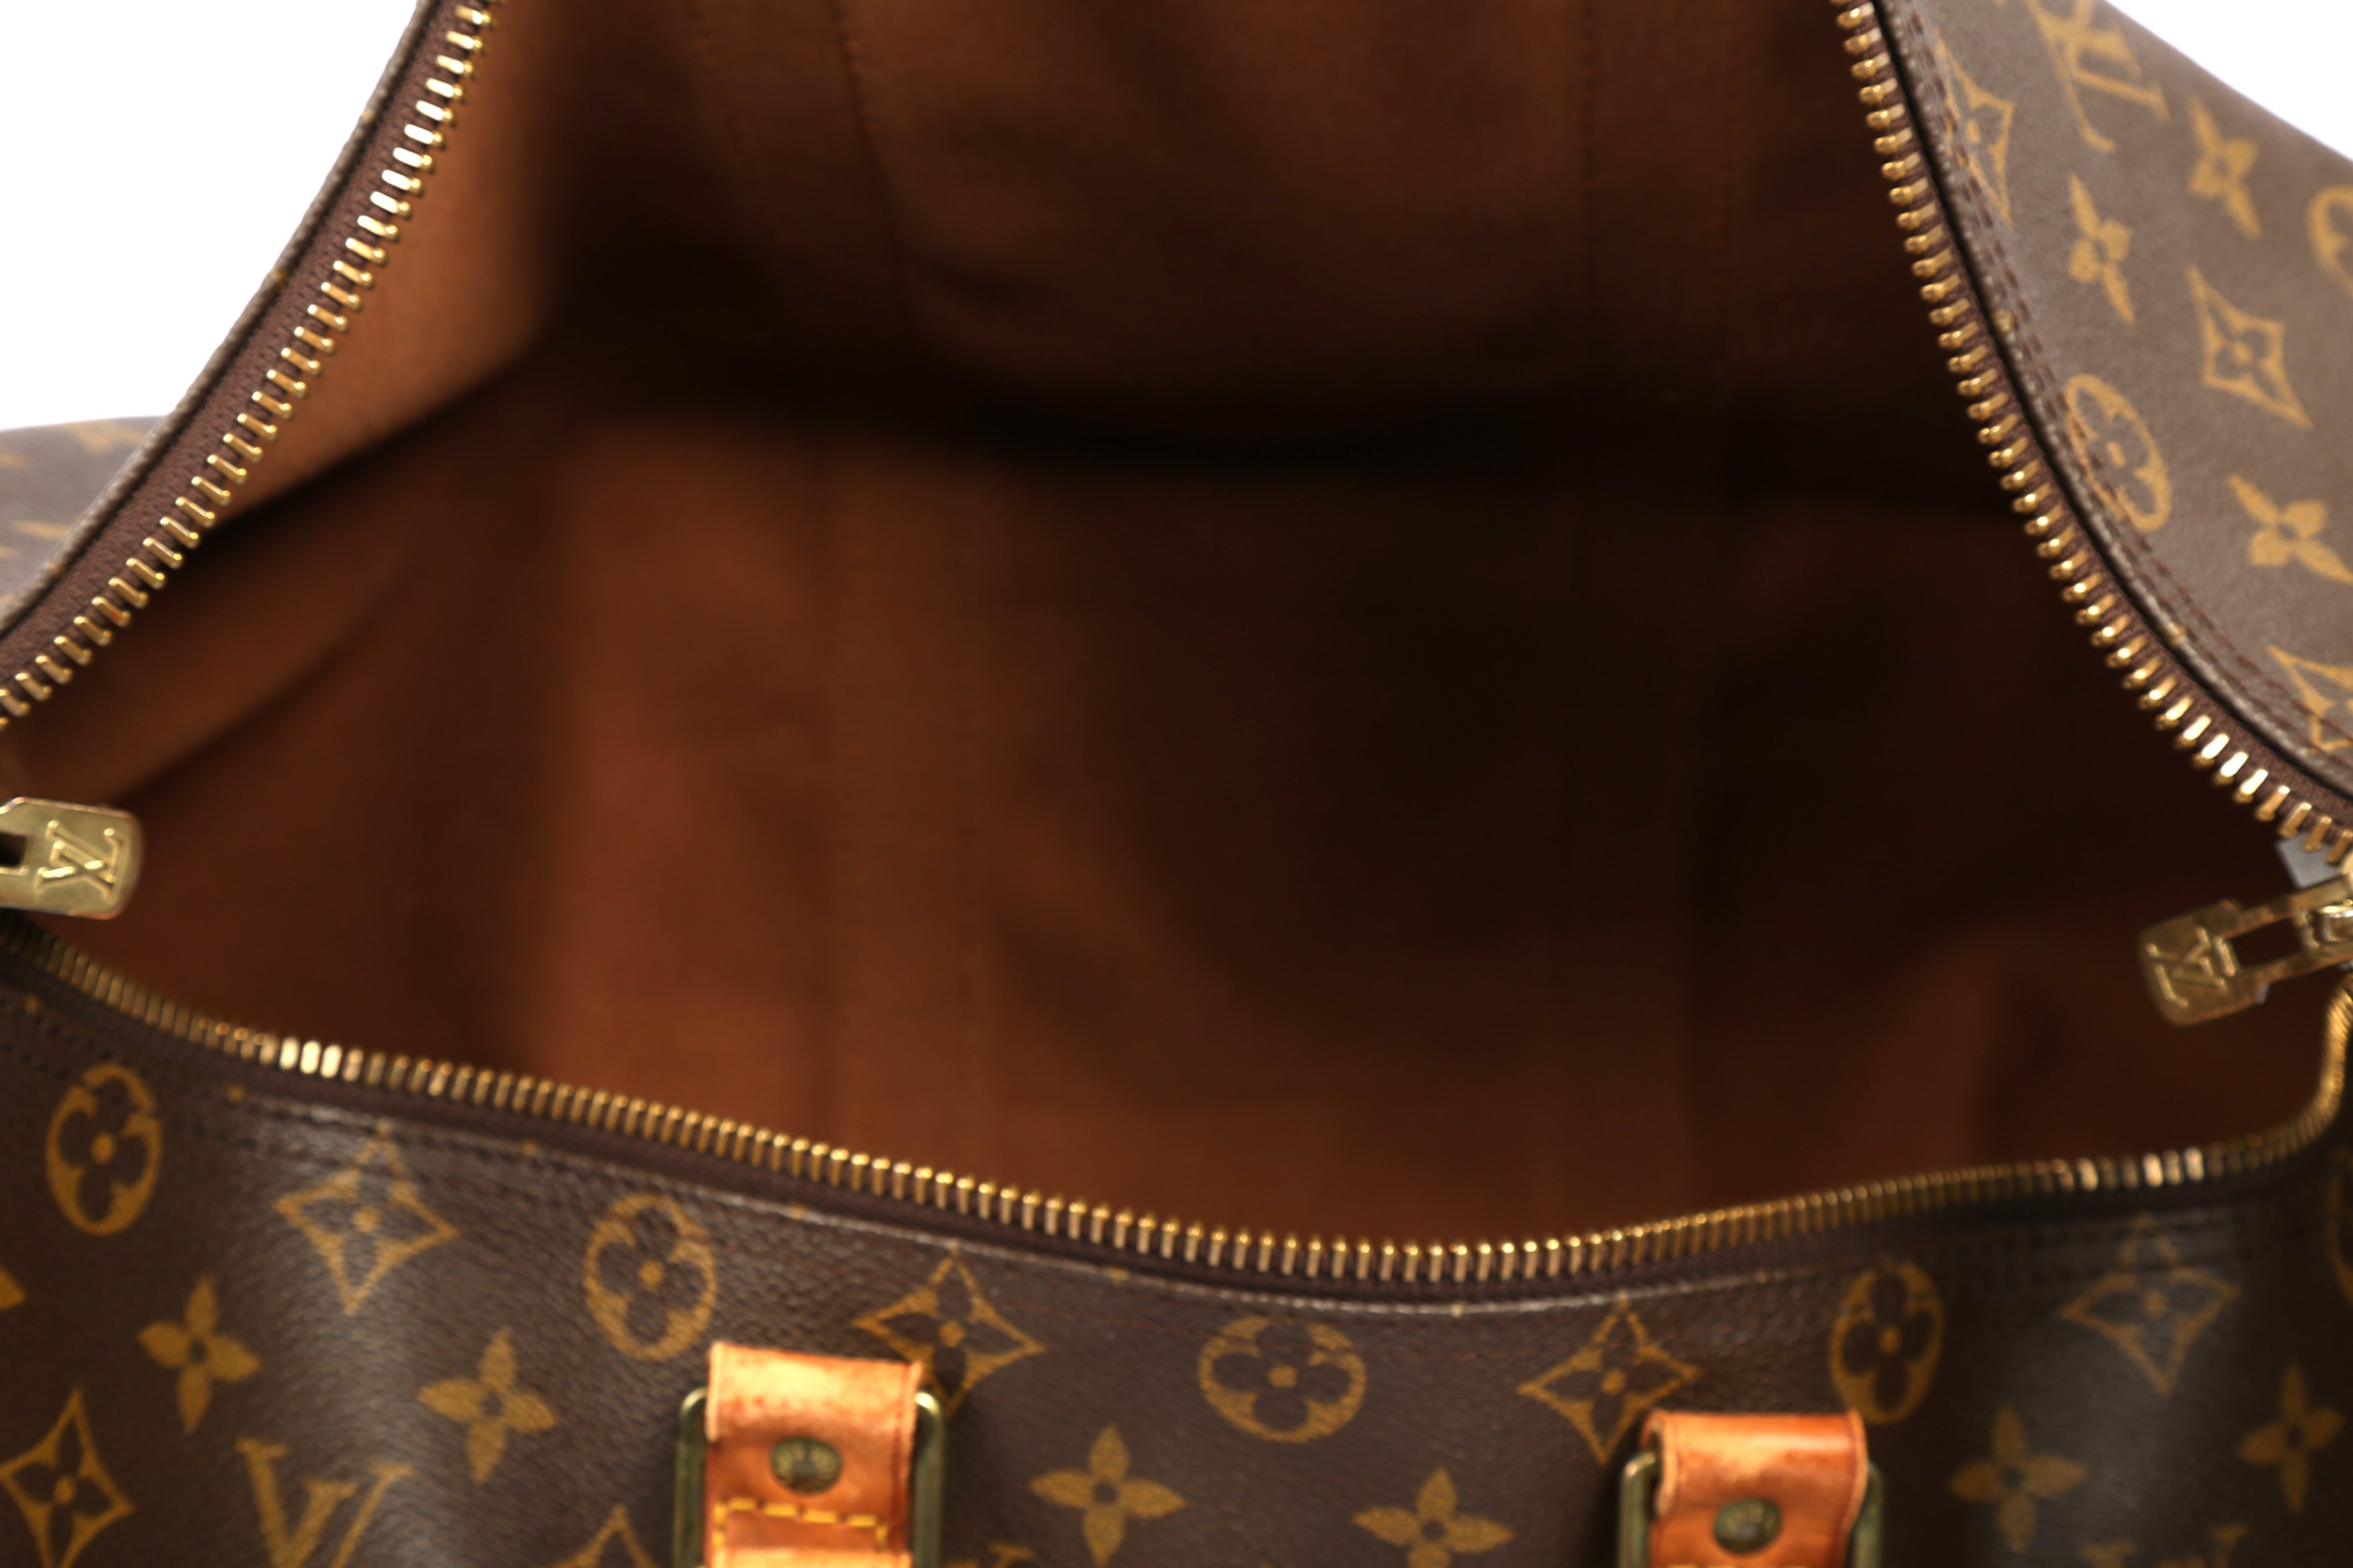 Louis Vuitton Monogram Keepall Bandouliere 45 - Image 7 of 7